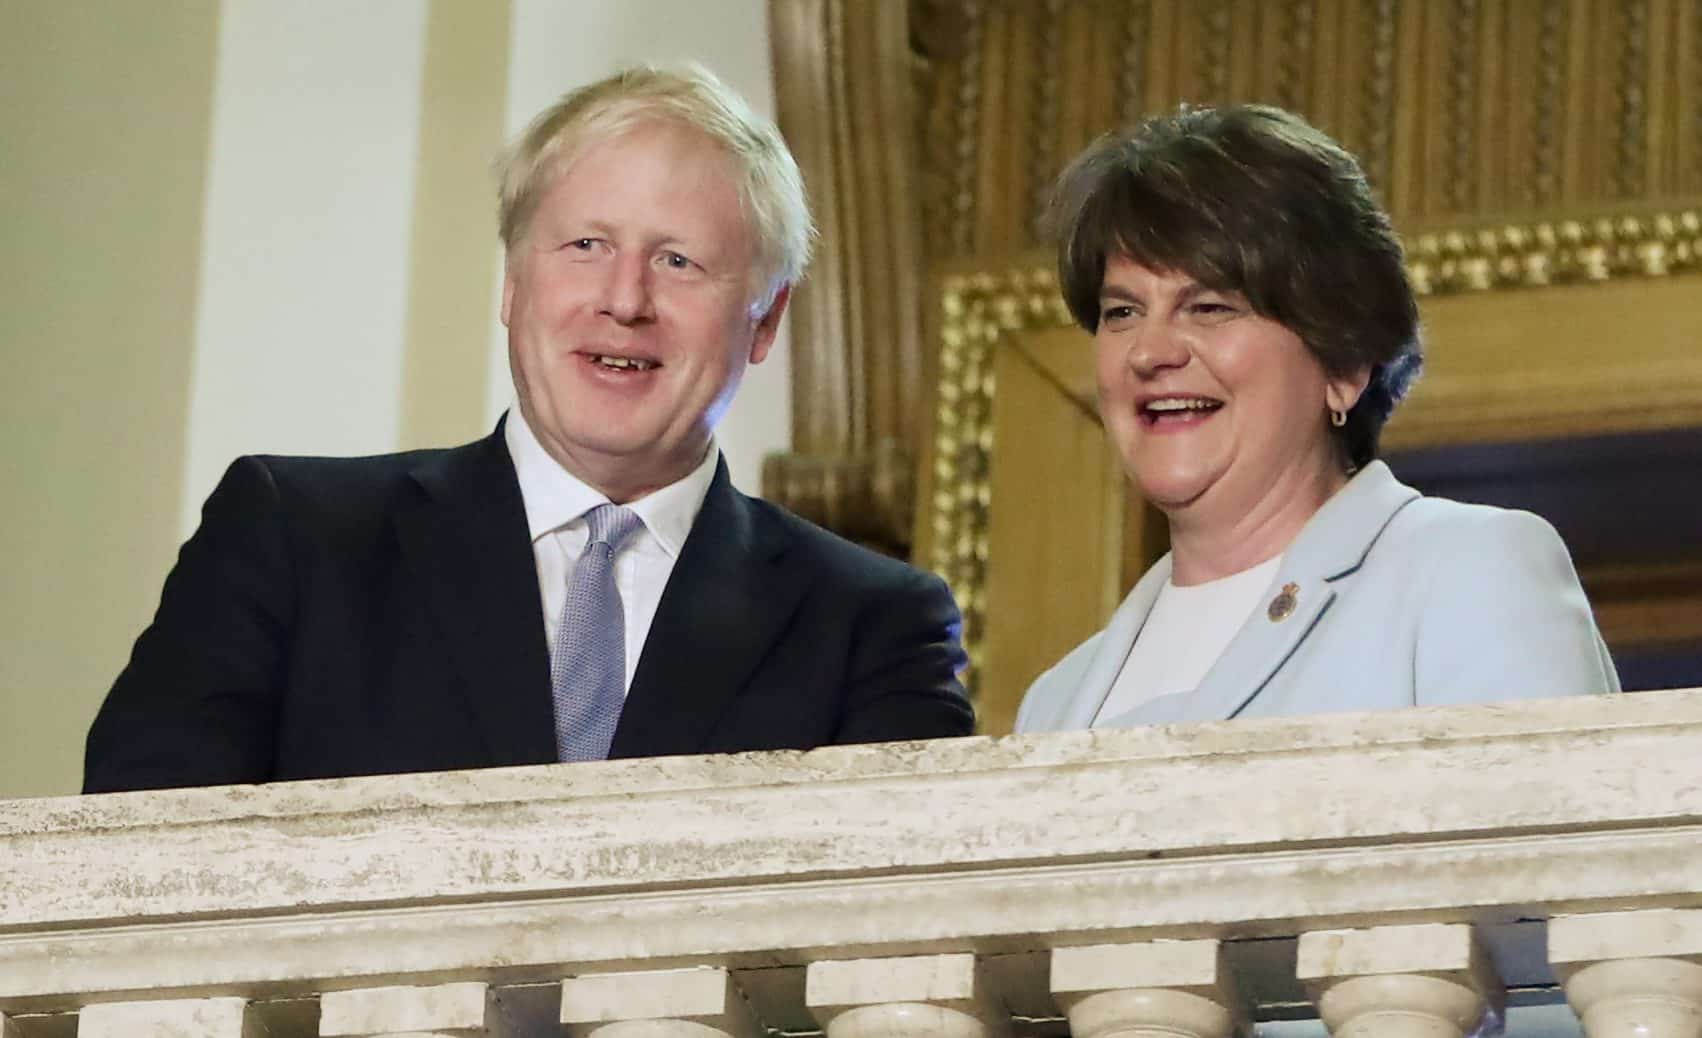 Boris Johnson set to shell out ‘up to £2 billion’ on Northern Ireland powersharing deal